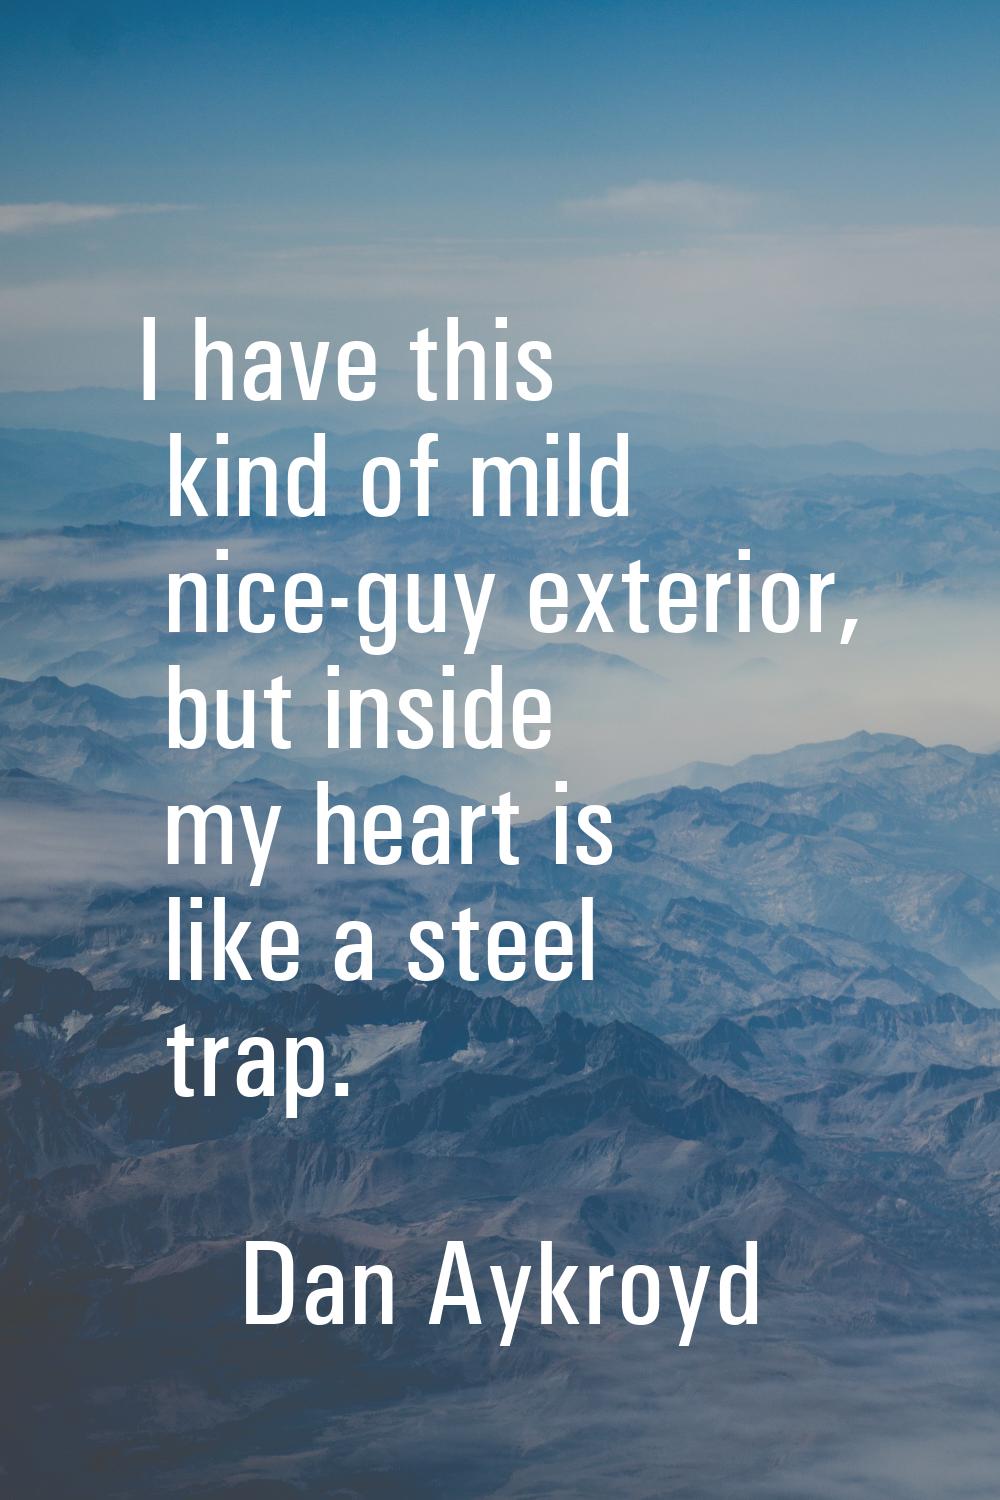 I have this kind of mild nice-guy exterior, but inside my heart is like a steel trap.